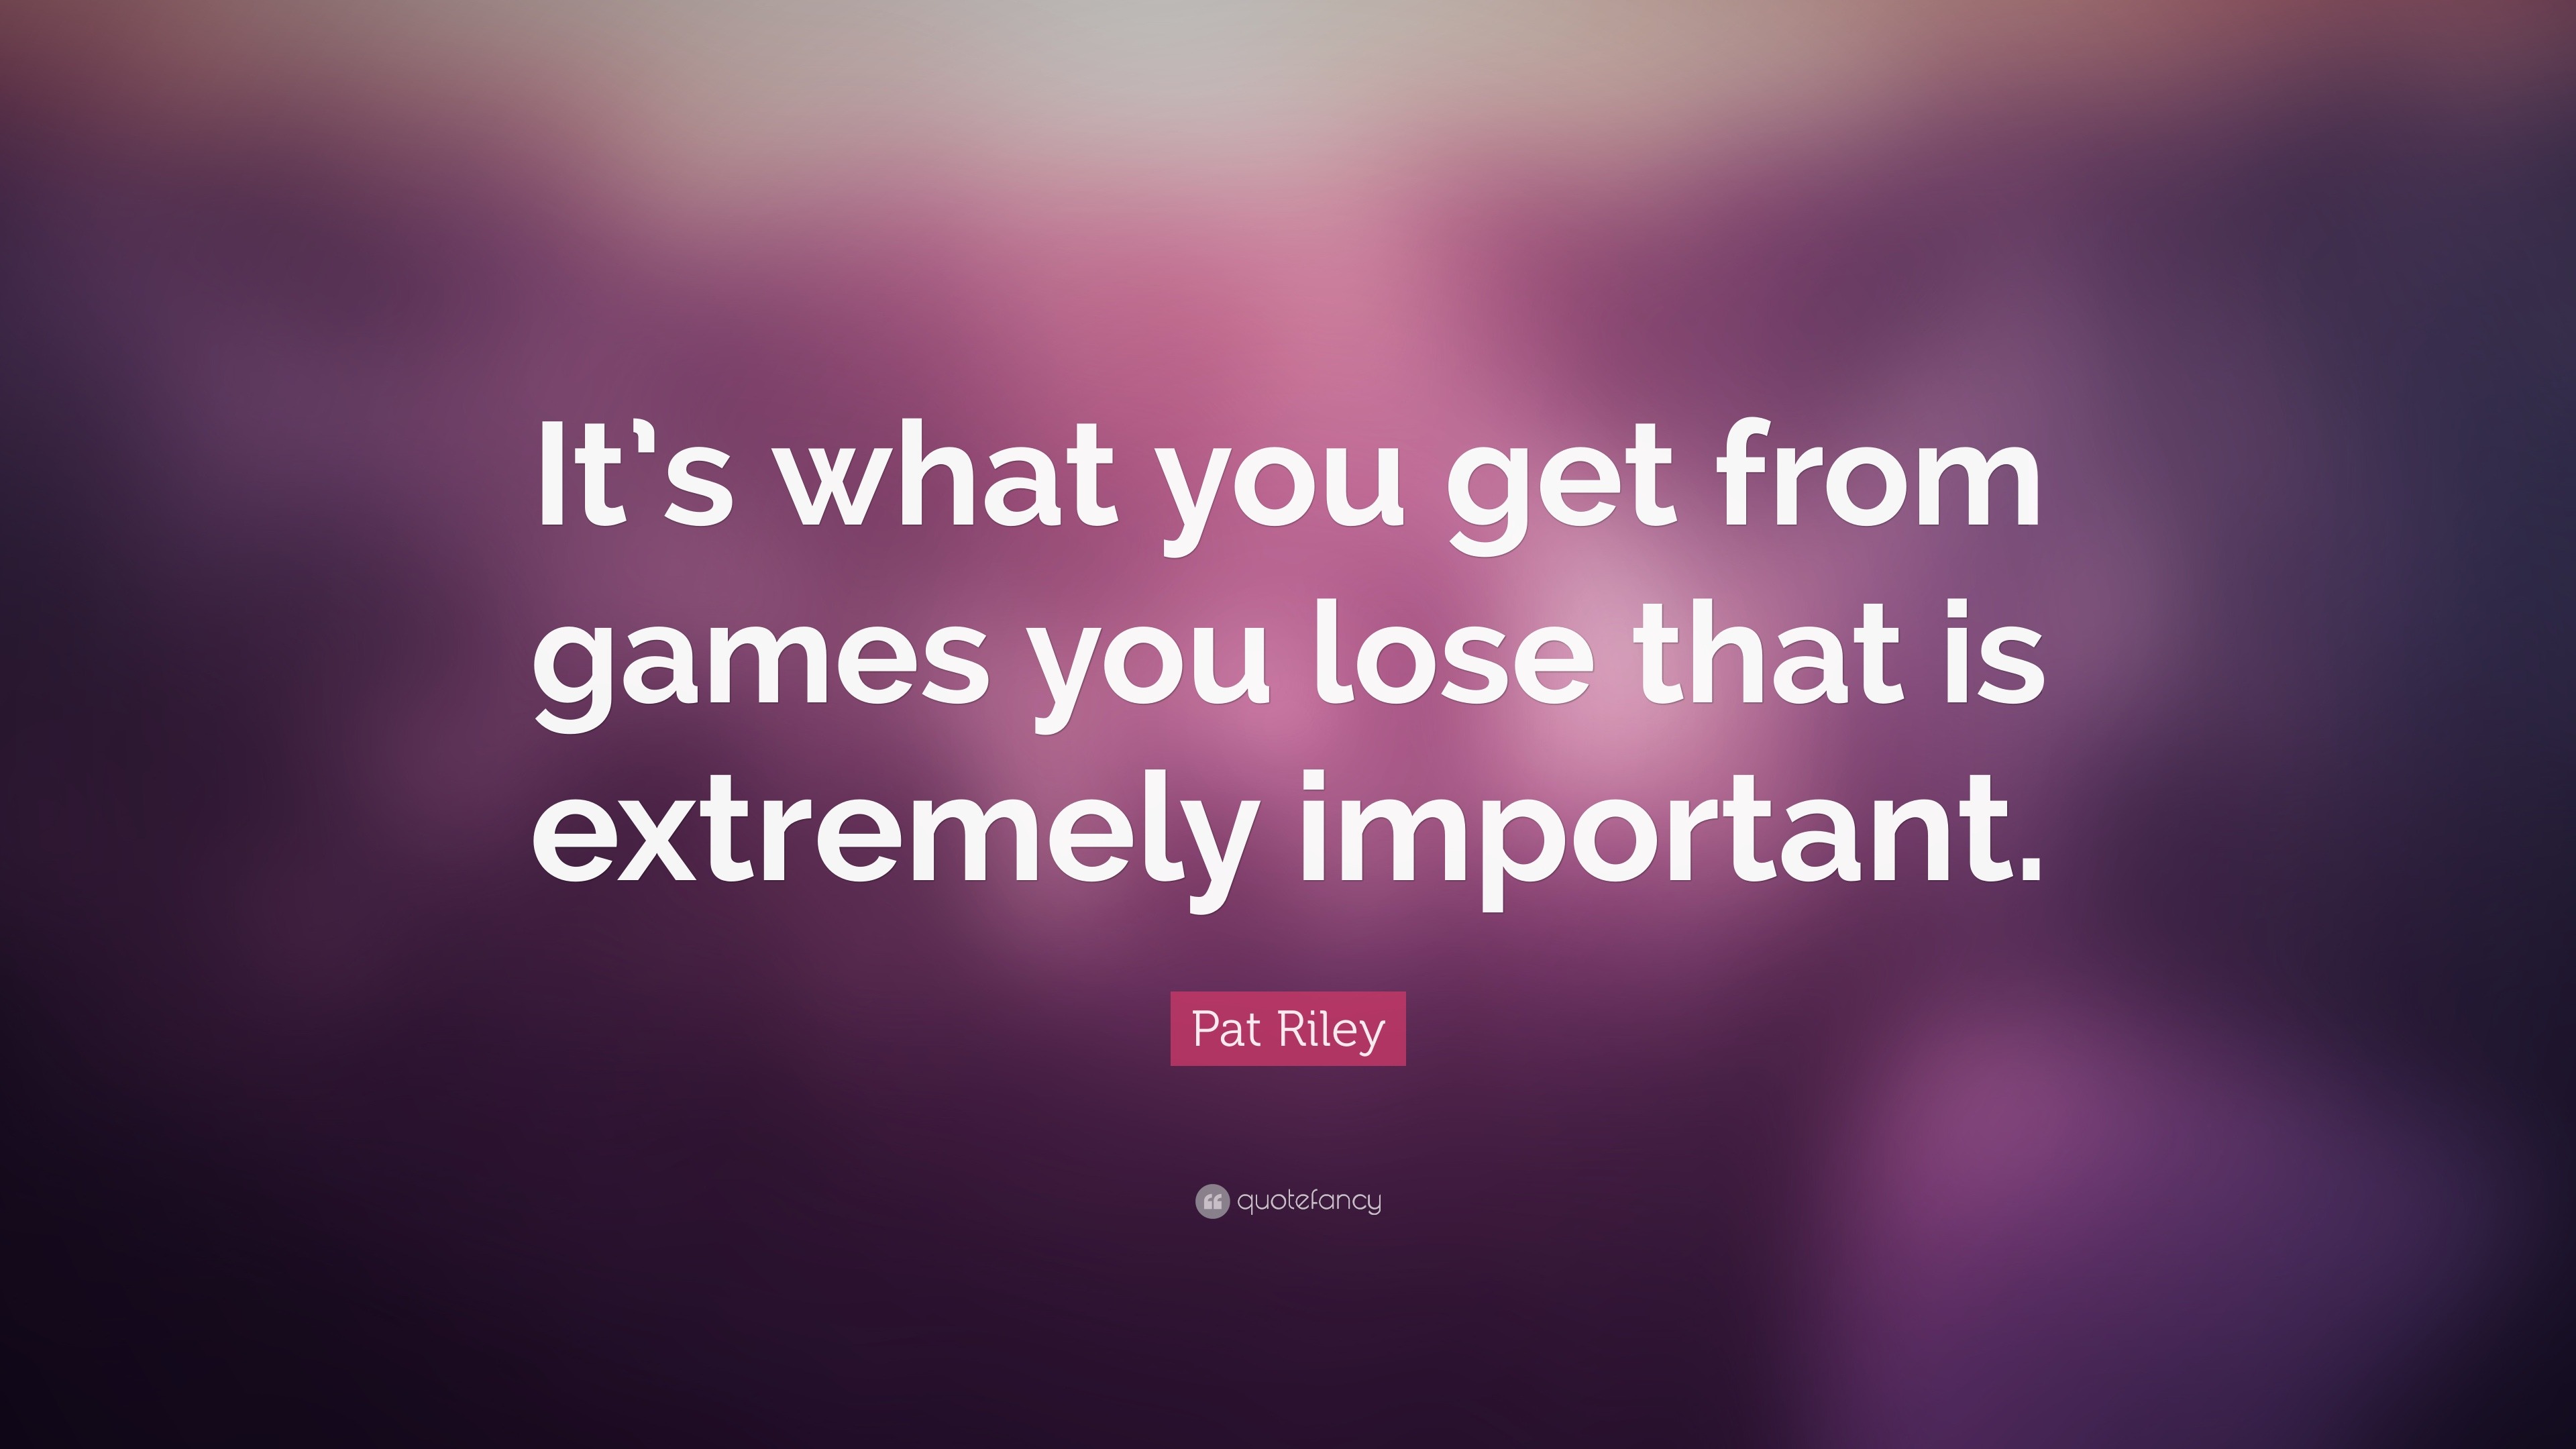 Pat Riley Quote: “It’s what you get from games you lose that is ...